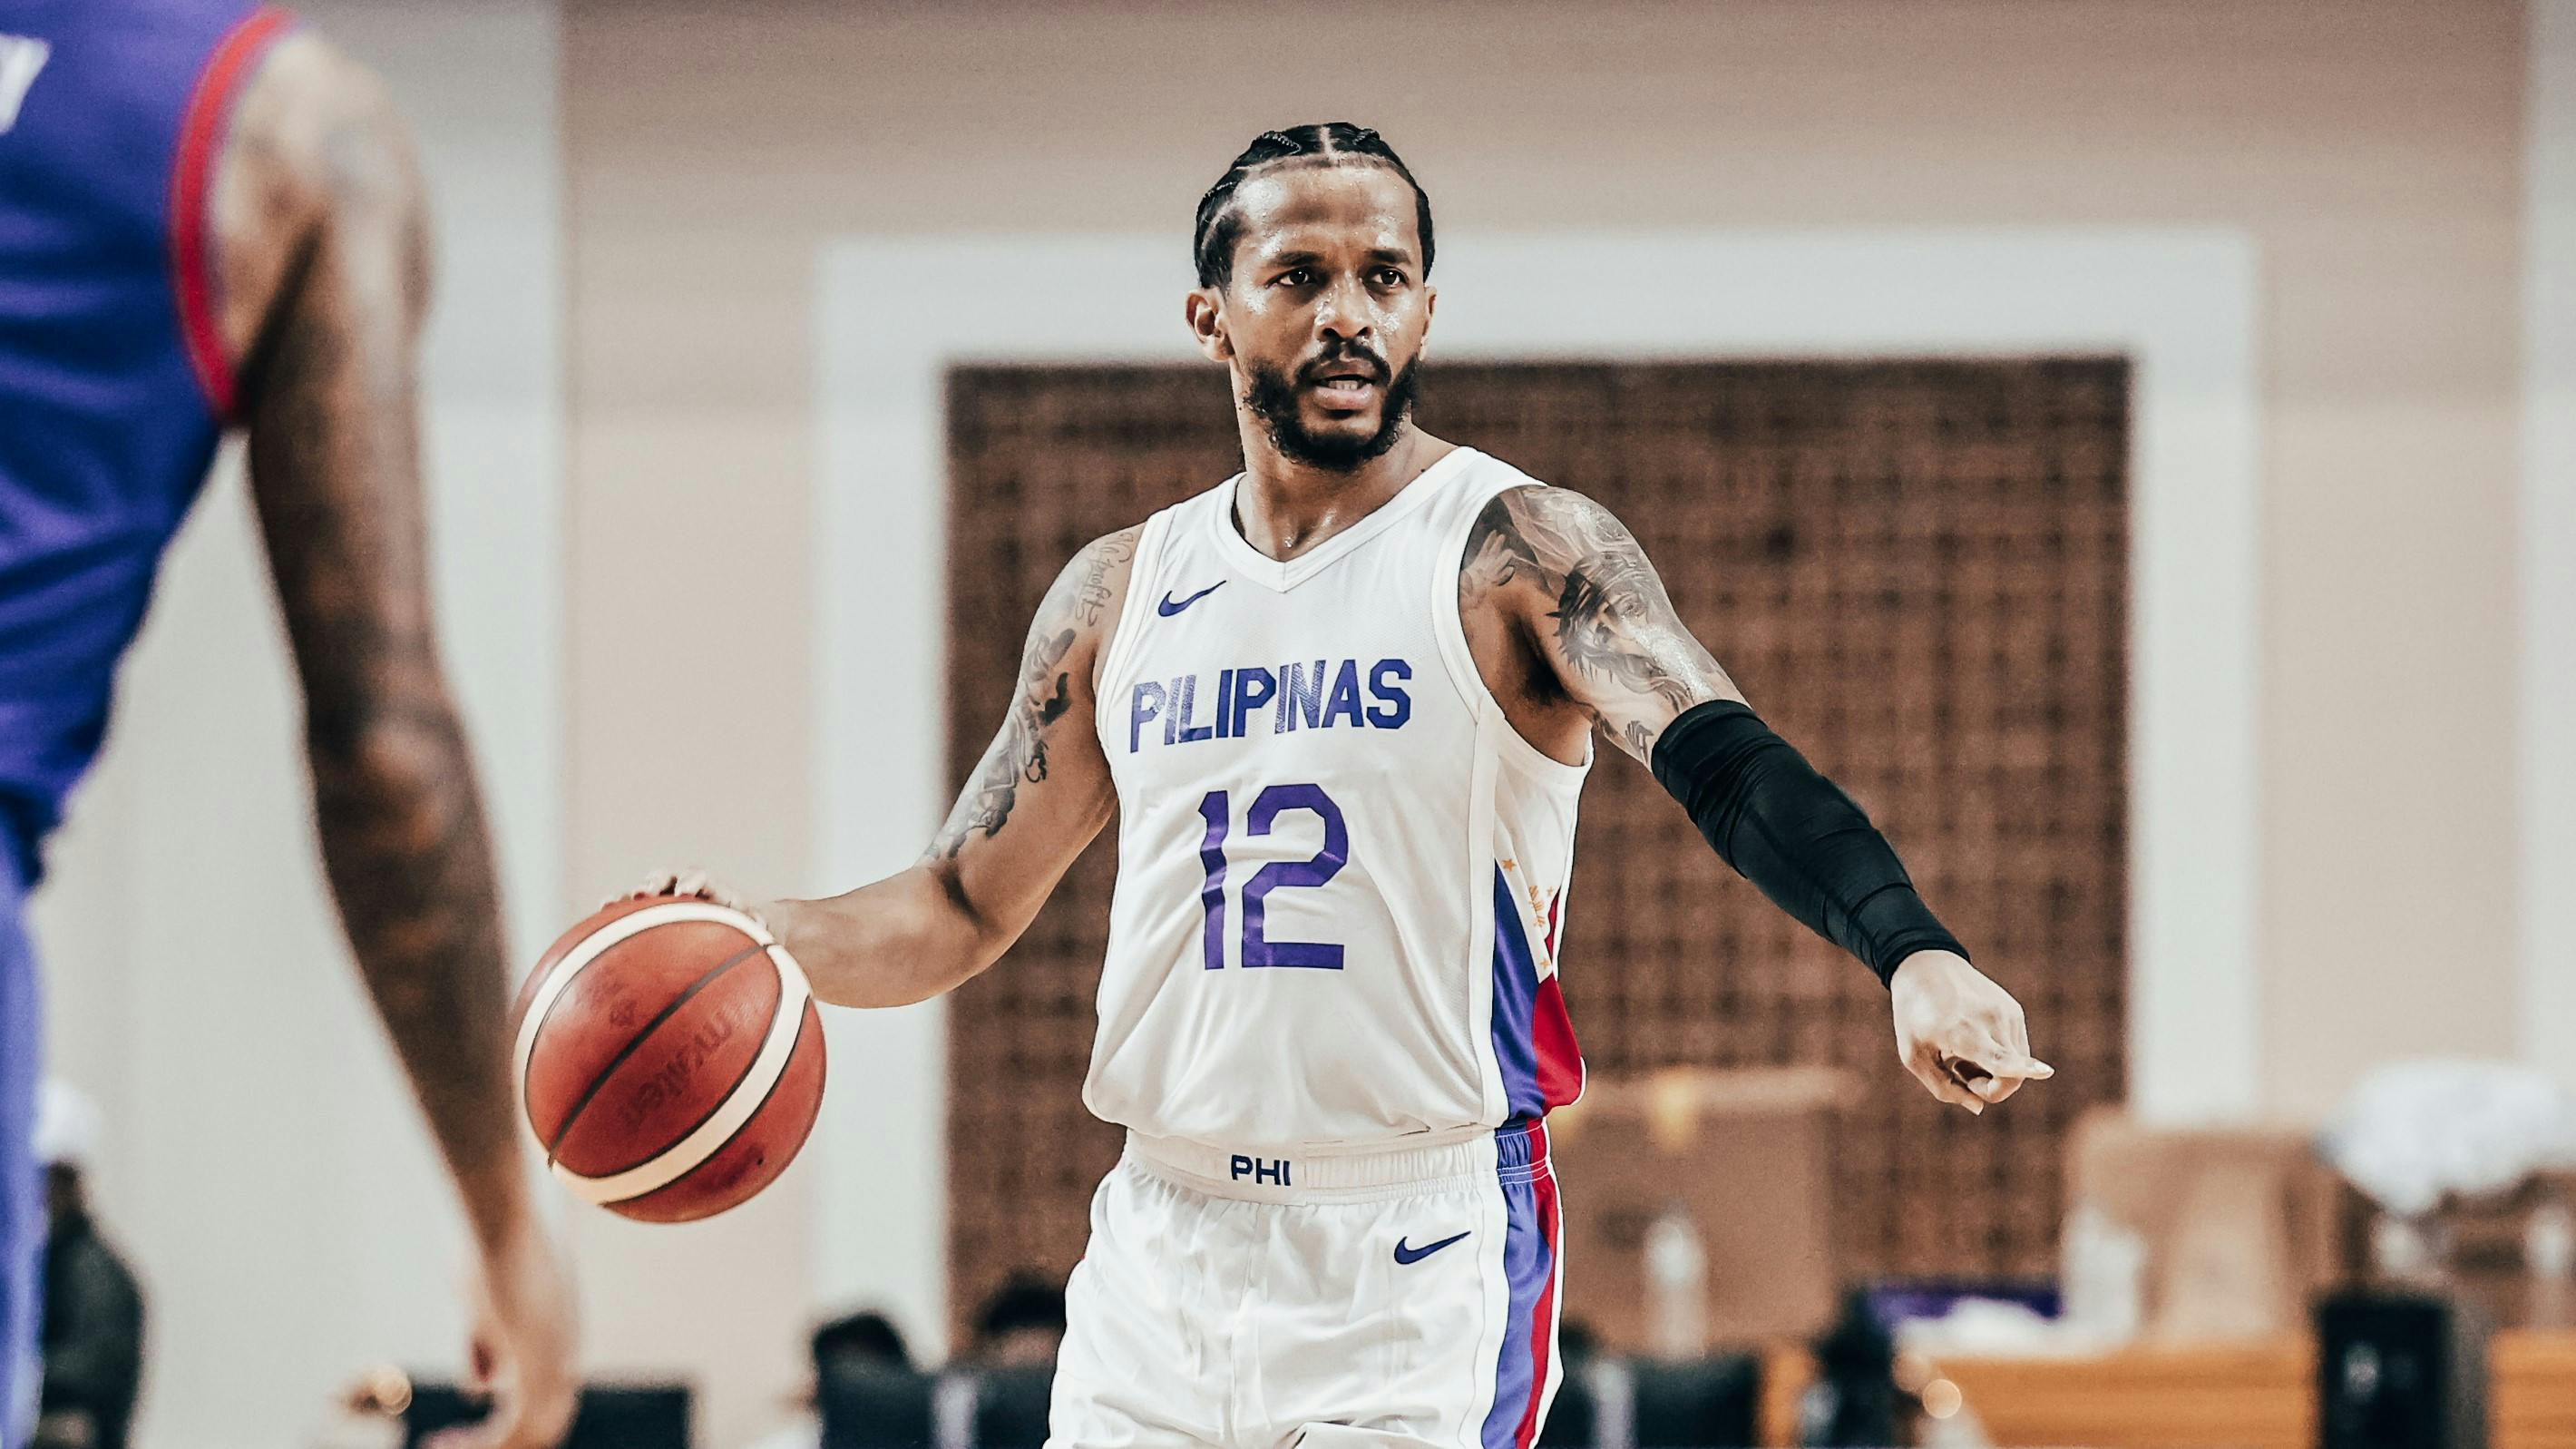 Chris Ross, Cjay Perez, three other players joining Gilas buildup for Asian Games 